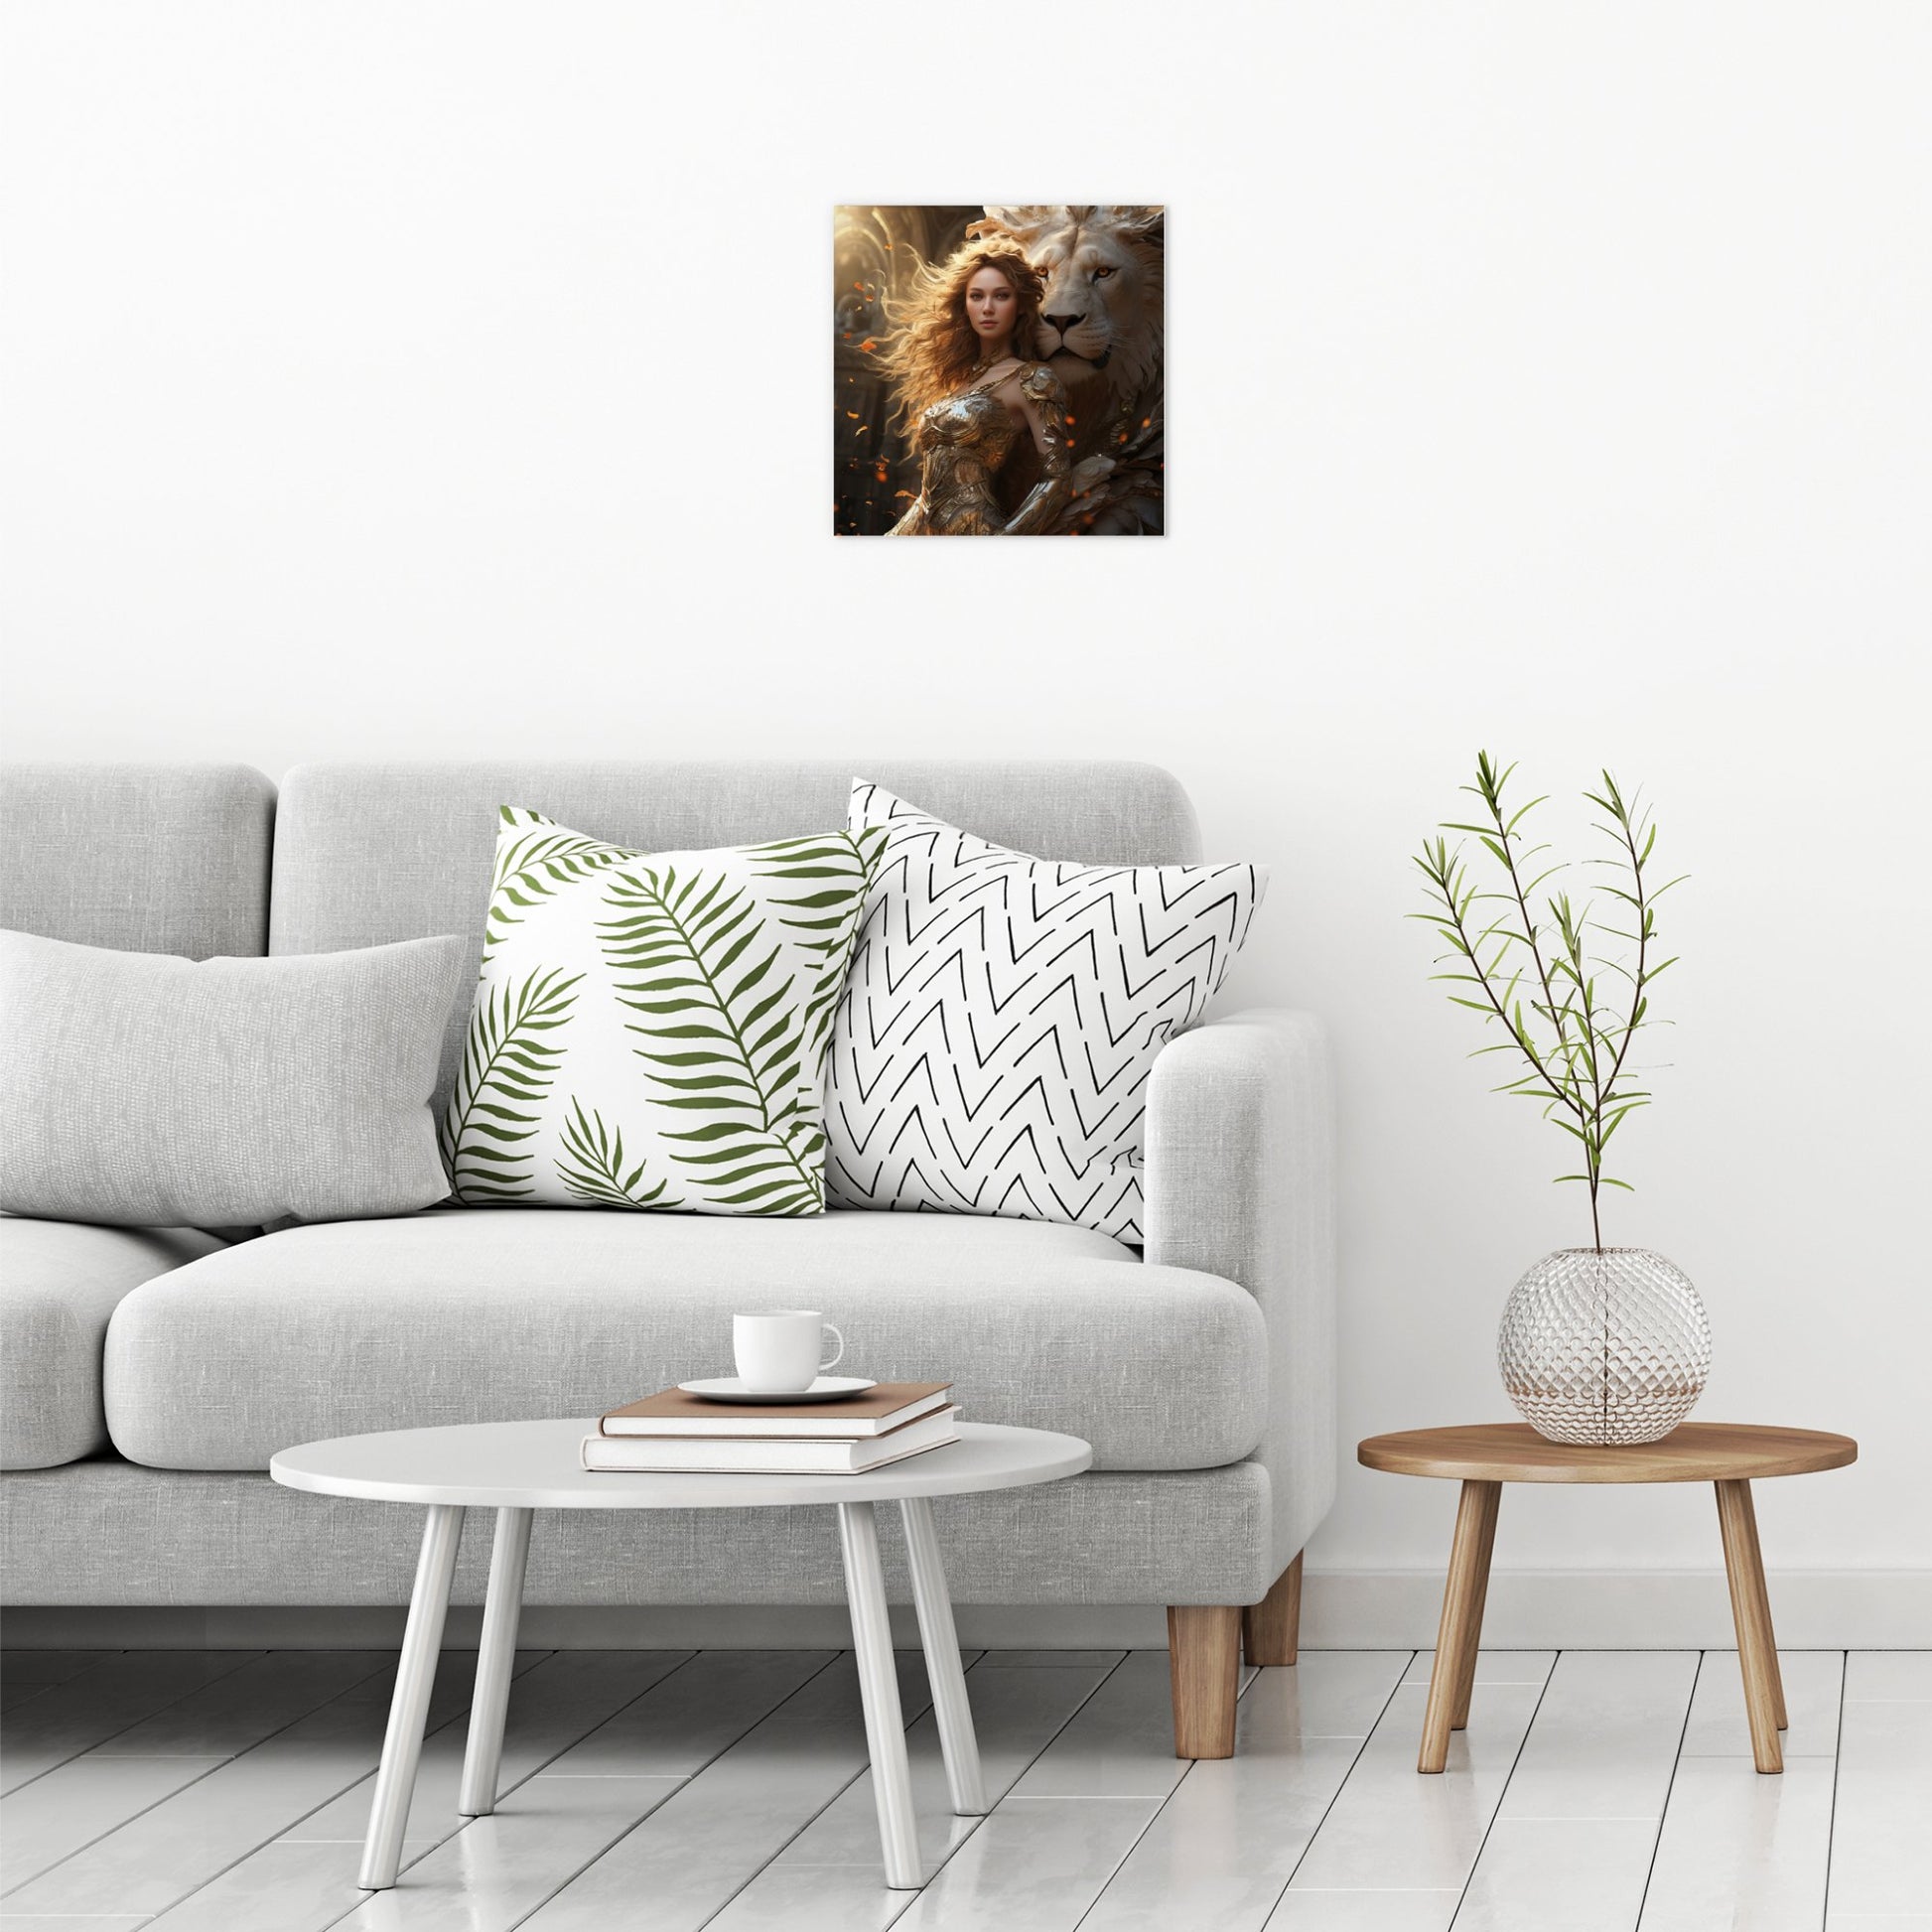 A contemporary modern room view showing a medium size metal art poster display plate with printed design of a Girl with a White Lion